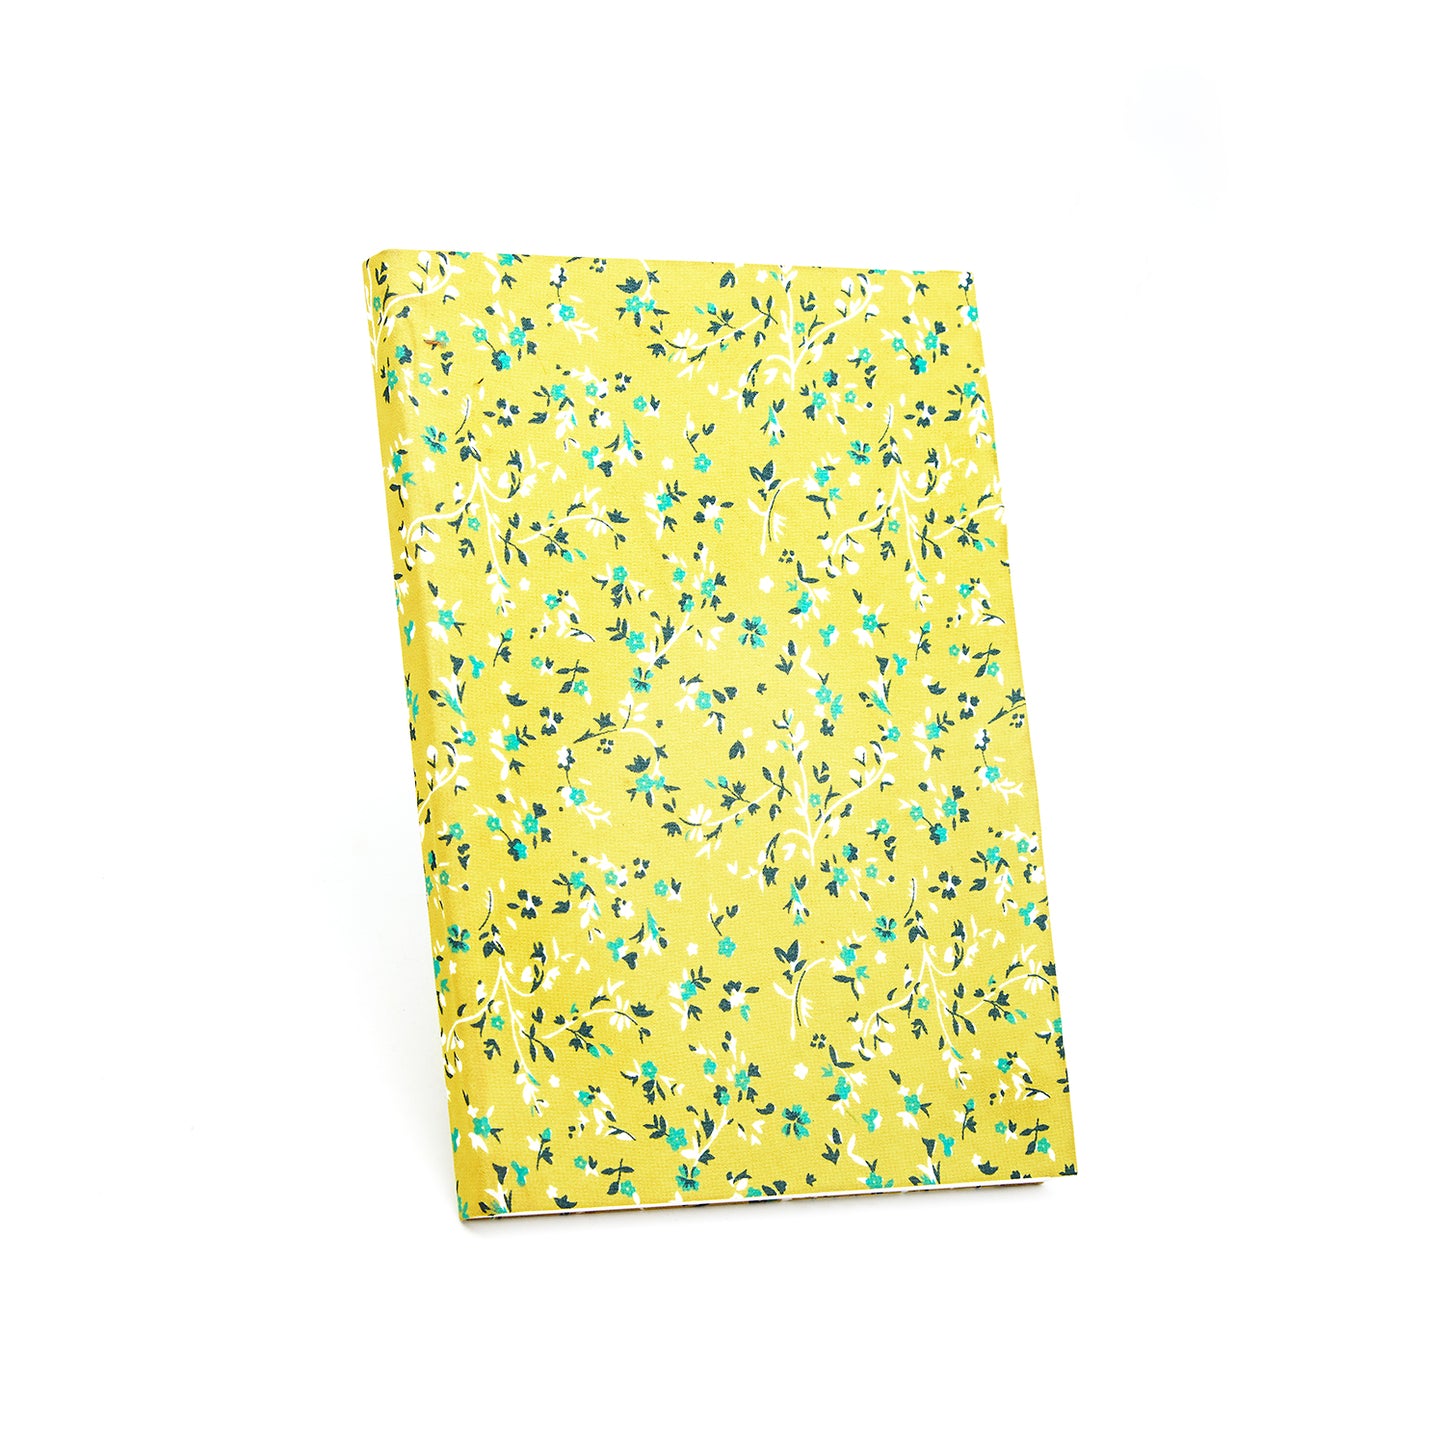 Butter Yellow Color with Ethnic Design - Regular Size Diary